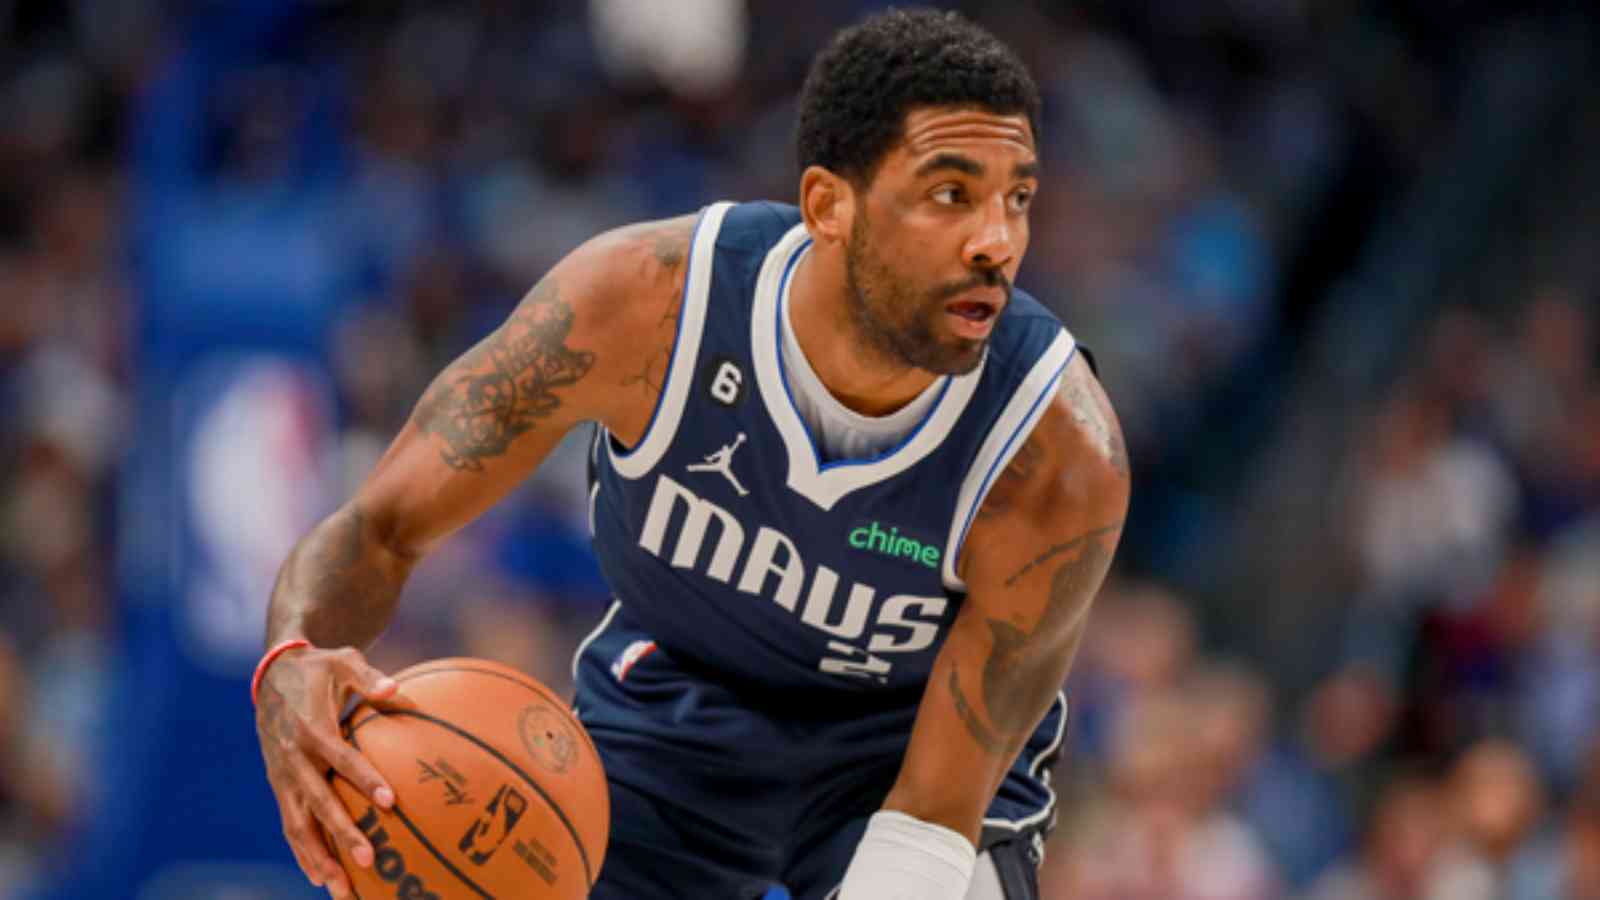 Kyrie Irving Biography: Age, Height, Birthday, Family, Net Worth